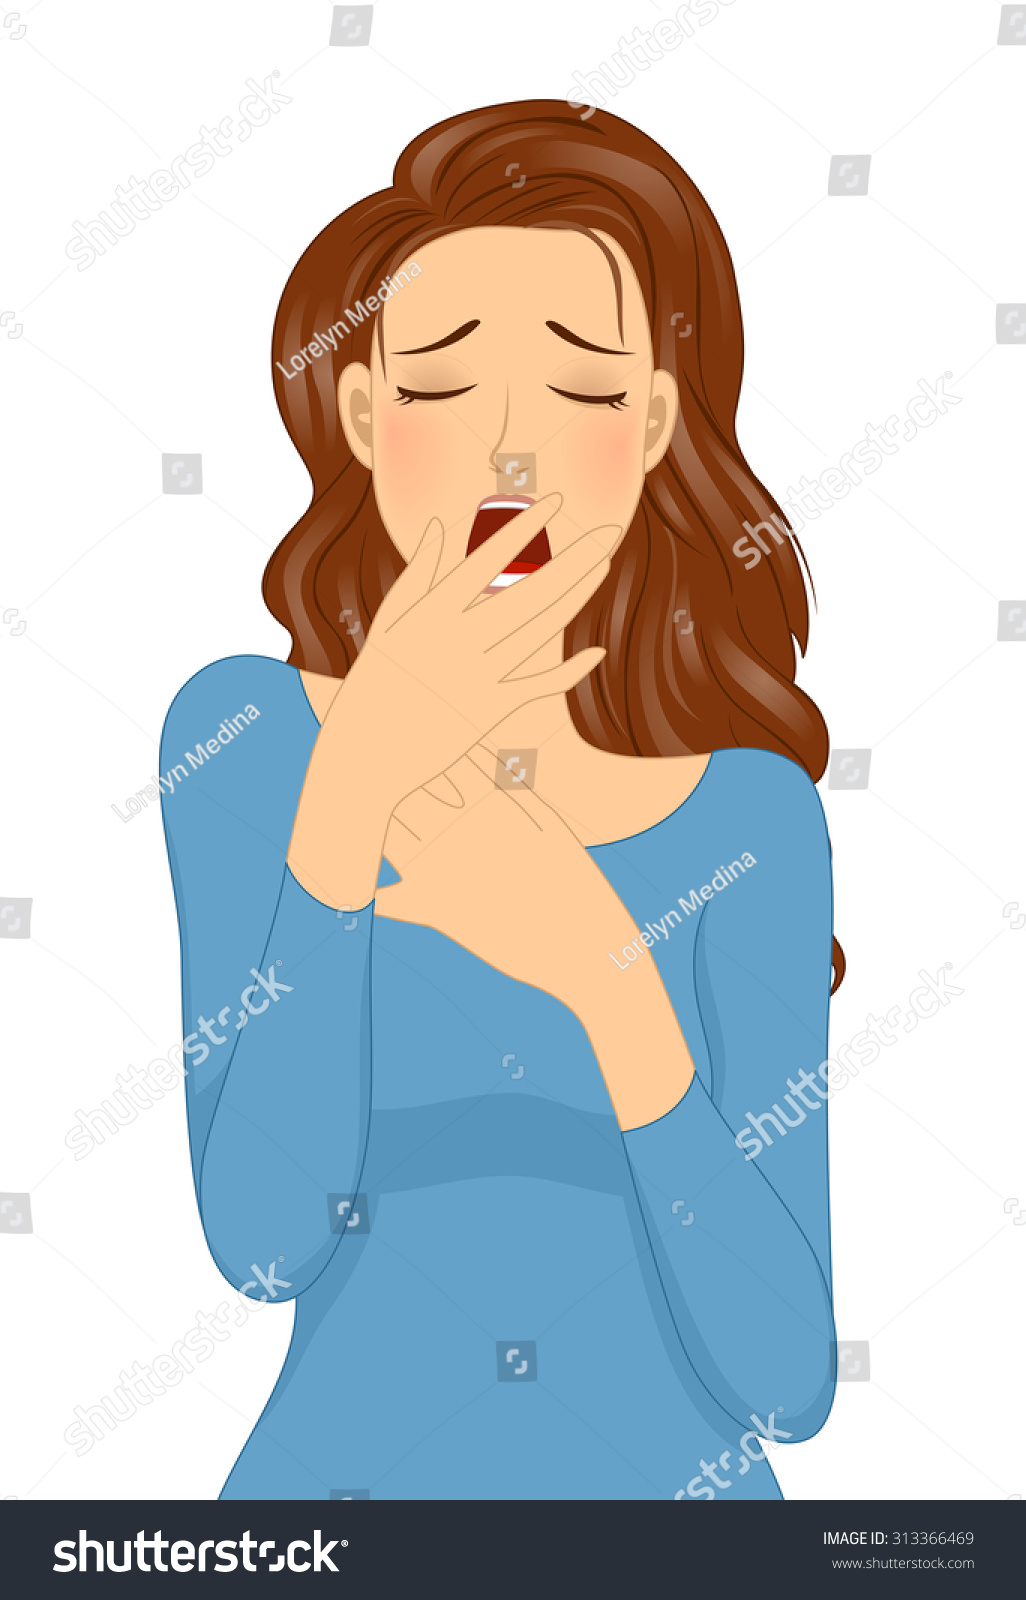 clipart person yawning - photo #29